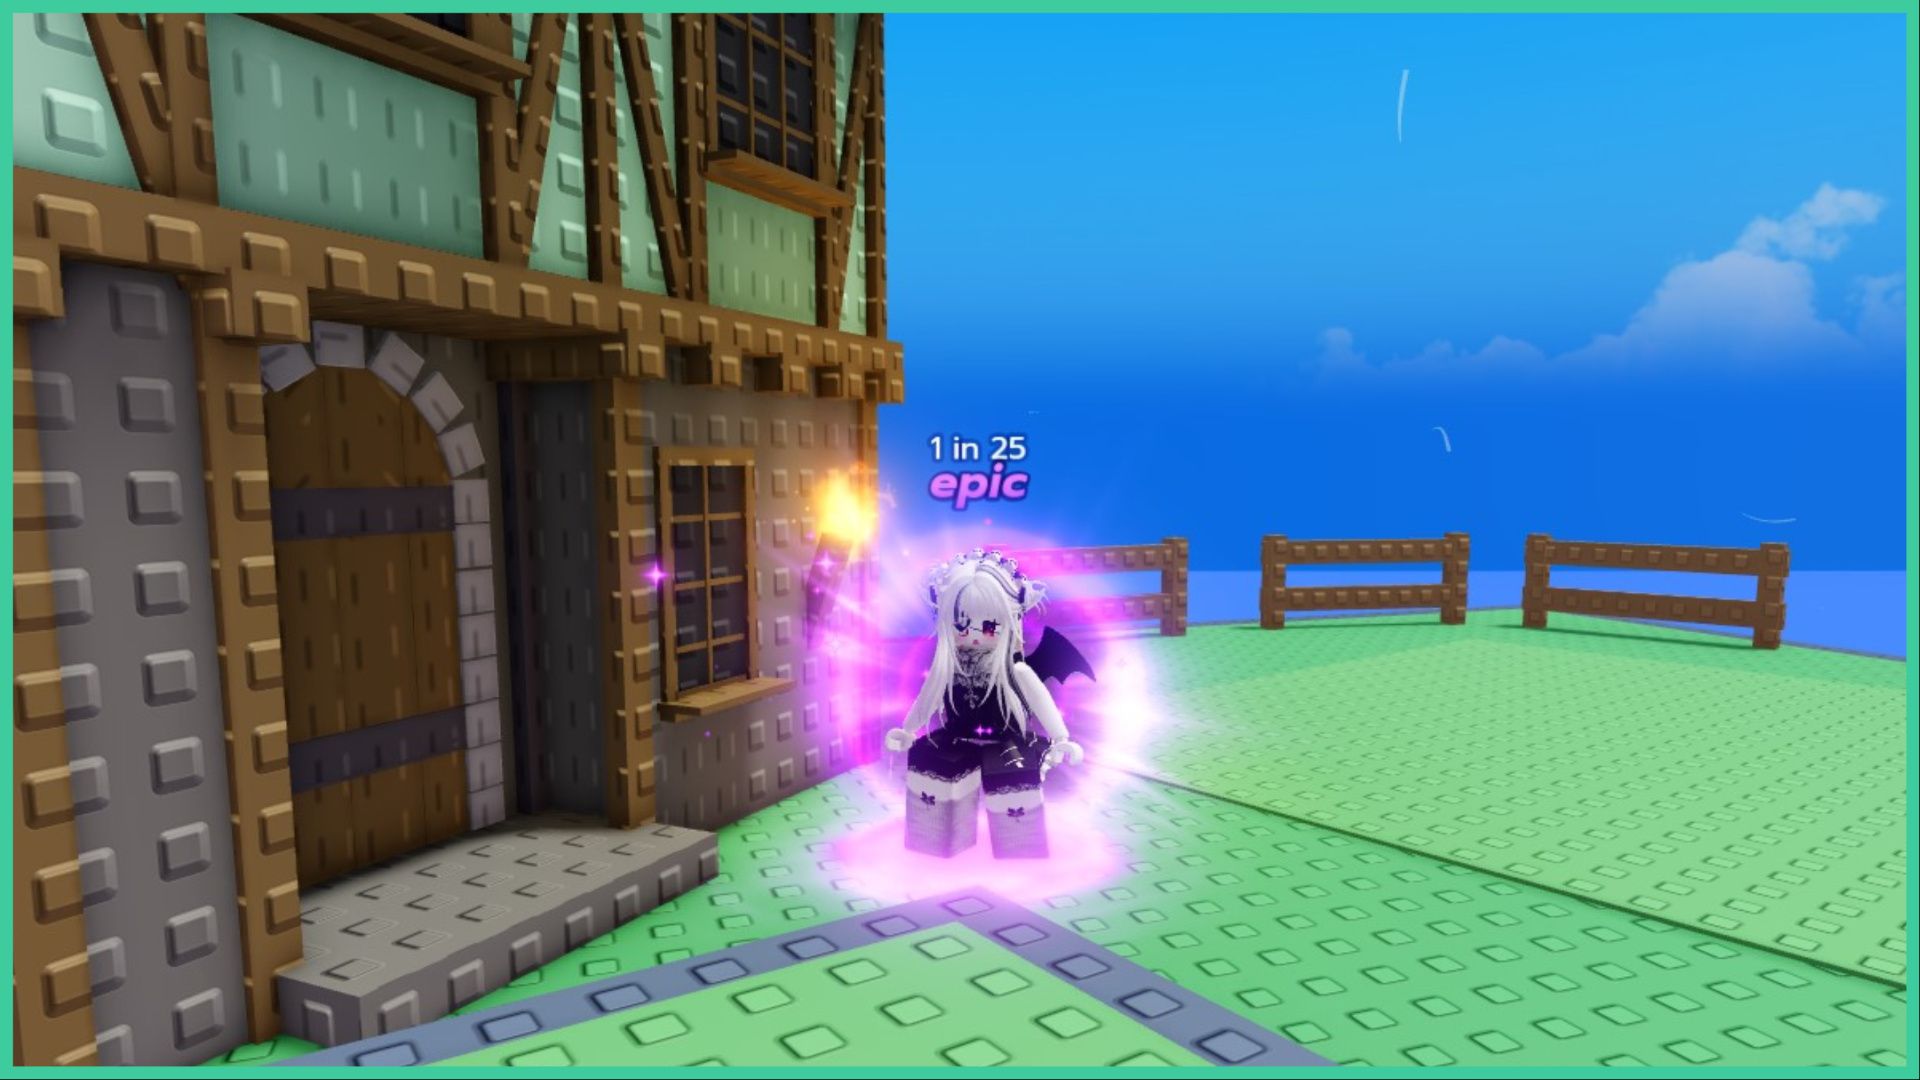 feature image for our zenith rng codes guide, it's a screenshot from the game as a character equips the purple epic aura that shines around them as they stand next to an old building with a fire touch attached to the front